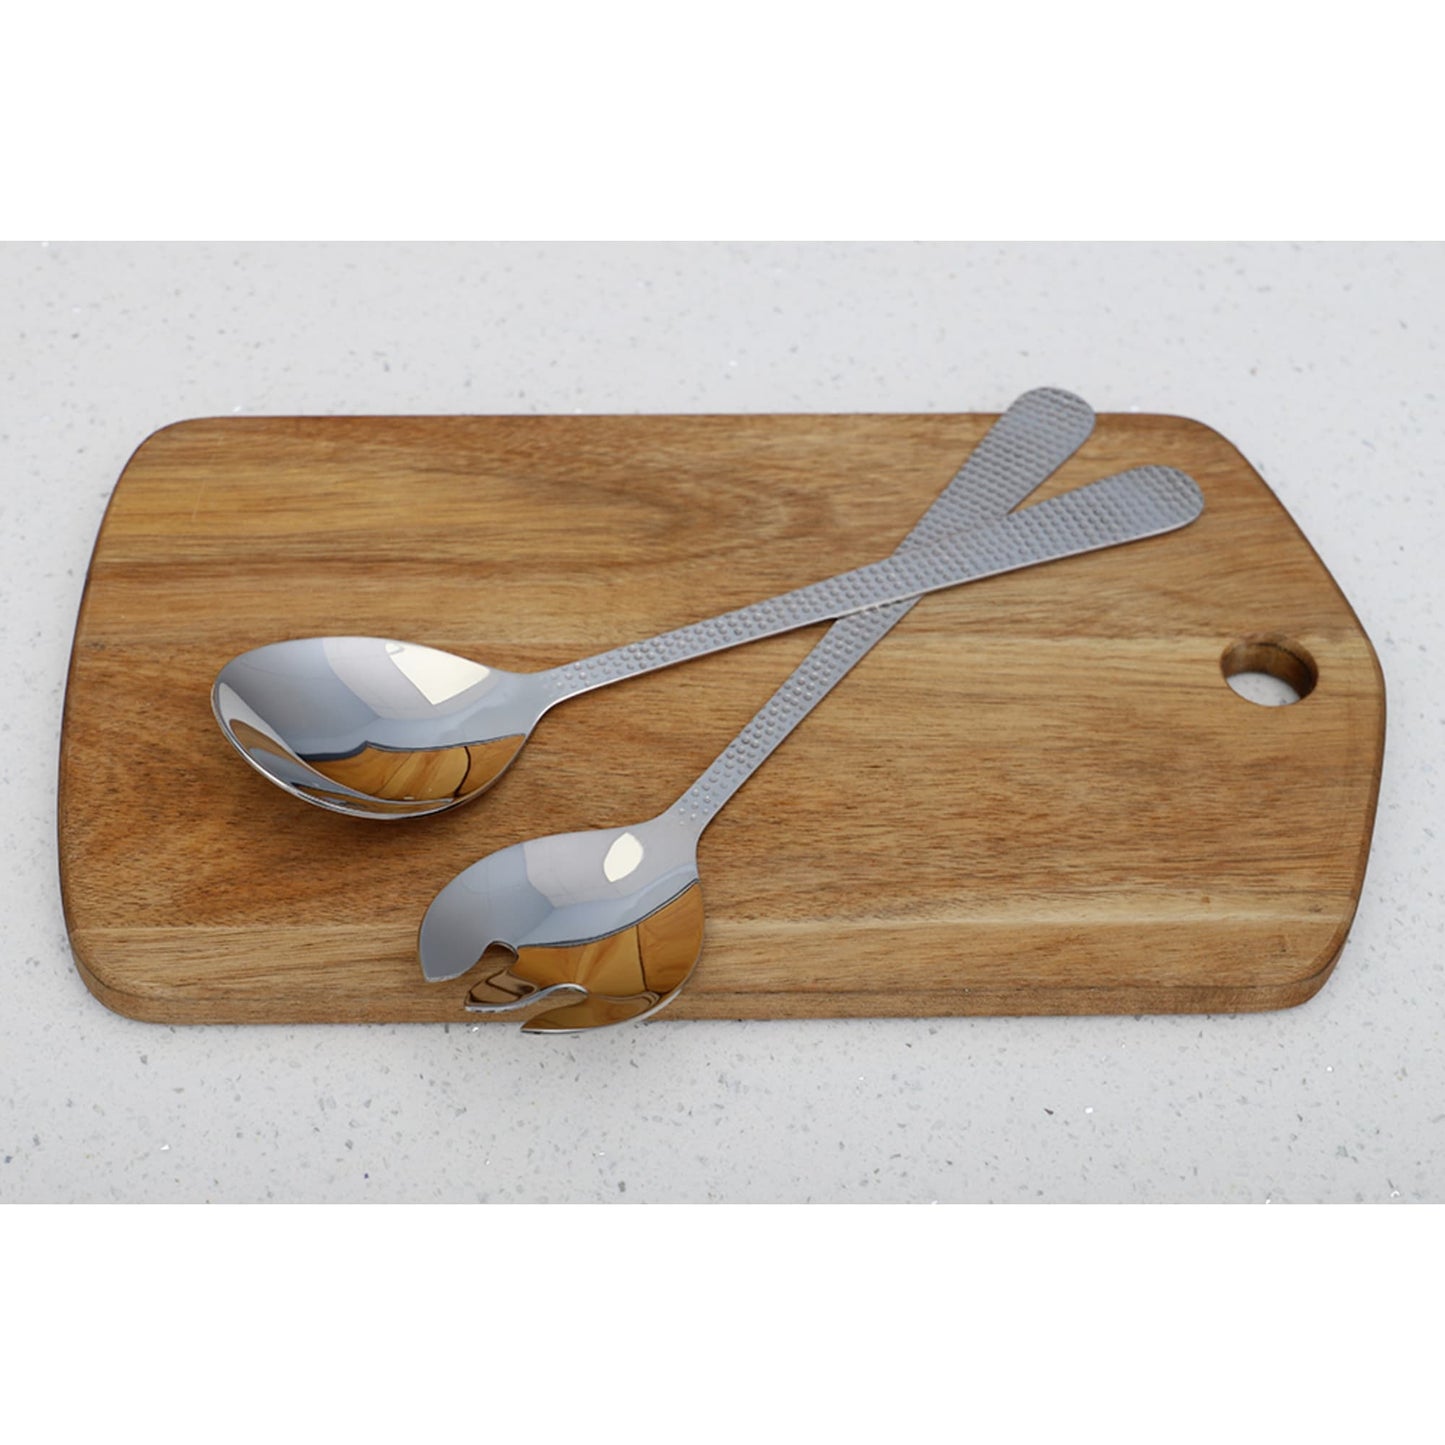 2 Piece Stainless Steel Hosting Serving Set with Hammered Finish Handles, Silver